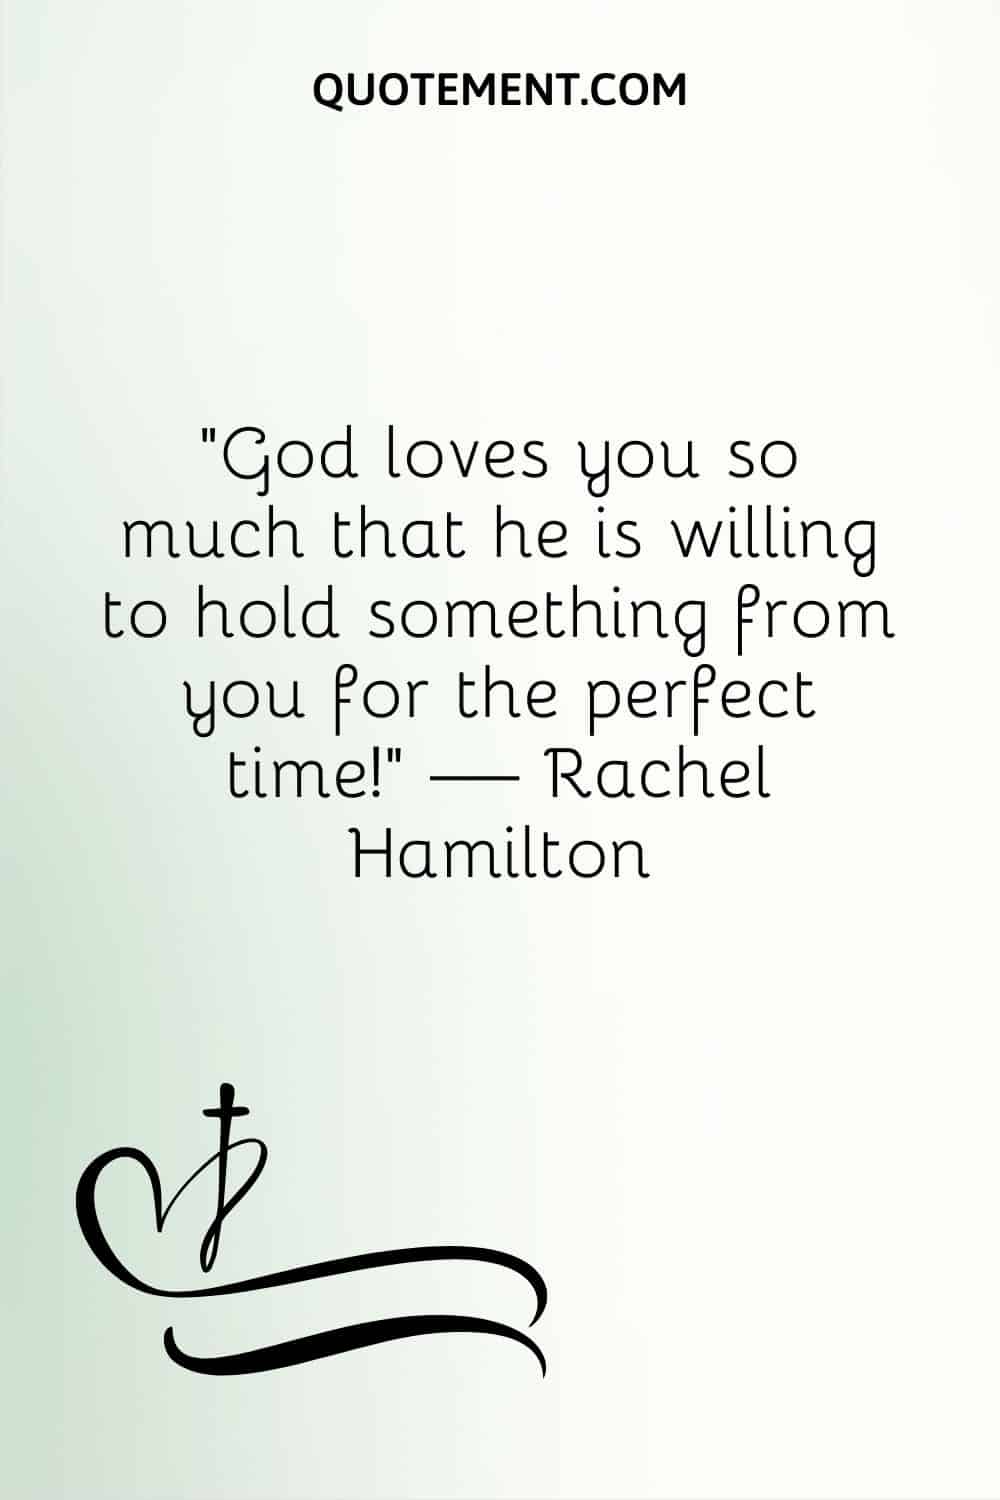 God loves you so much that he is willing to hold something from you for the perfect time